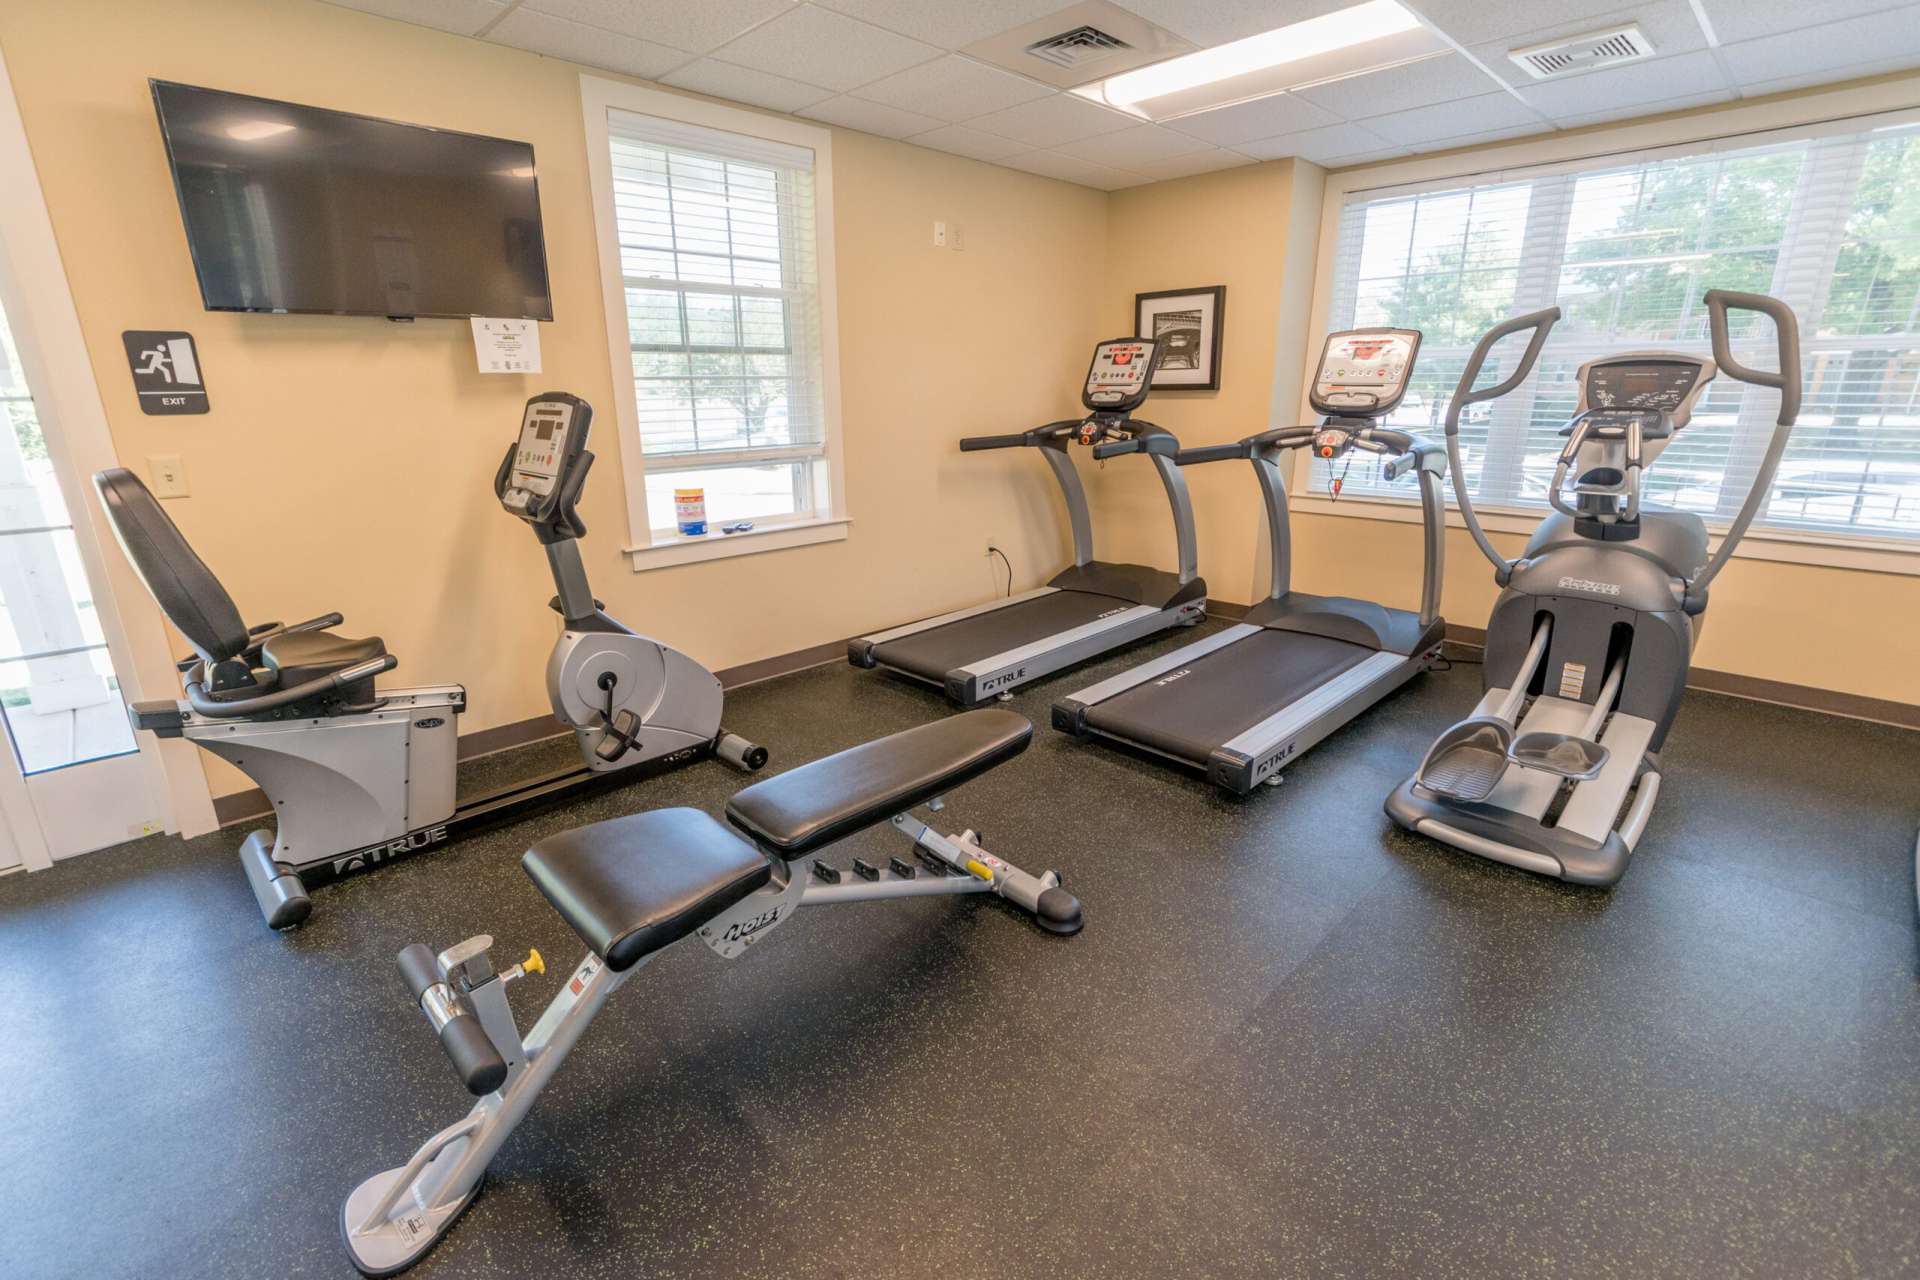 Indoor gym at Independence Crossing Apartments with a variety of workout equipment and large windows.